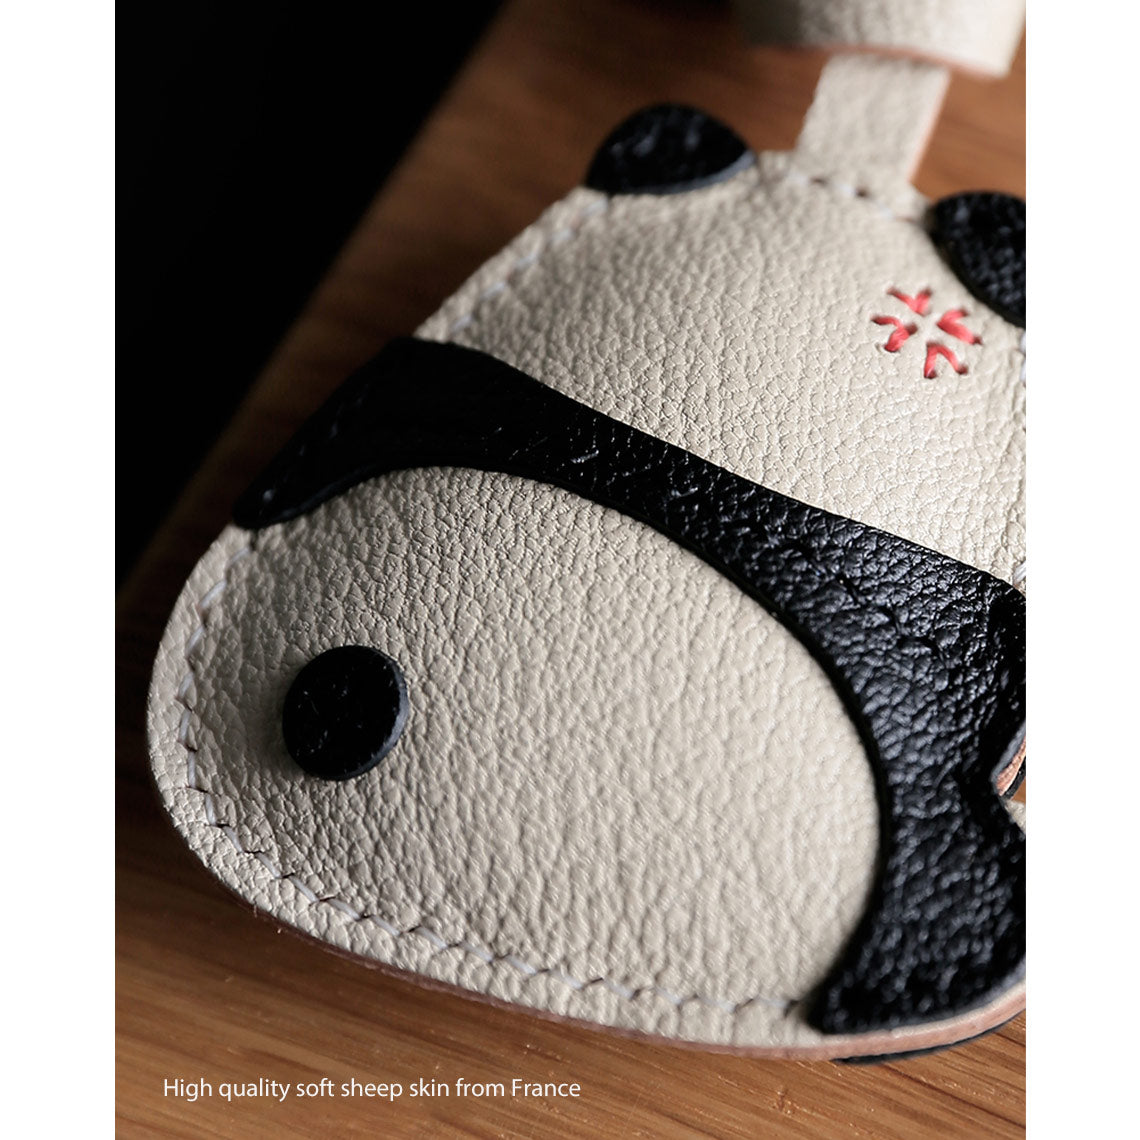 POPSEWING® Sheep Leather Cute Angry Panda Charm DIY Kit